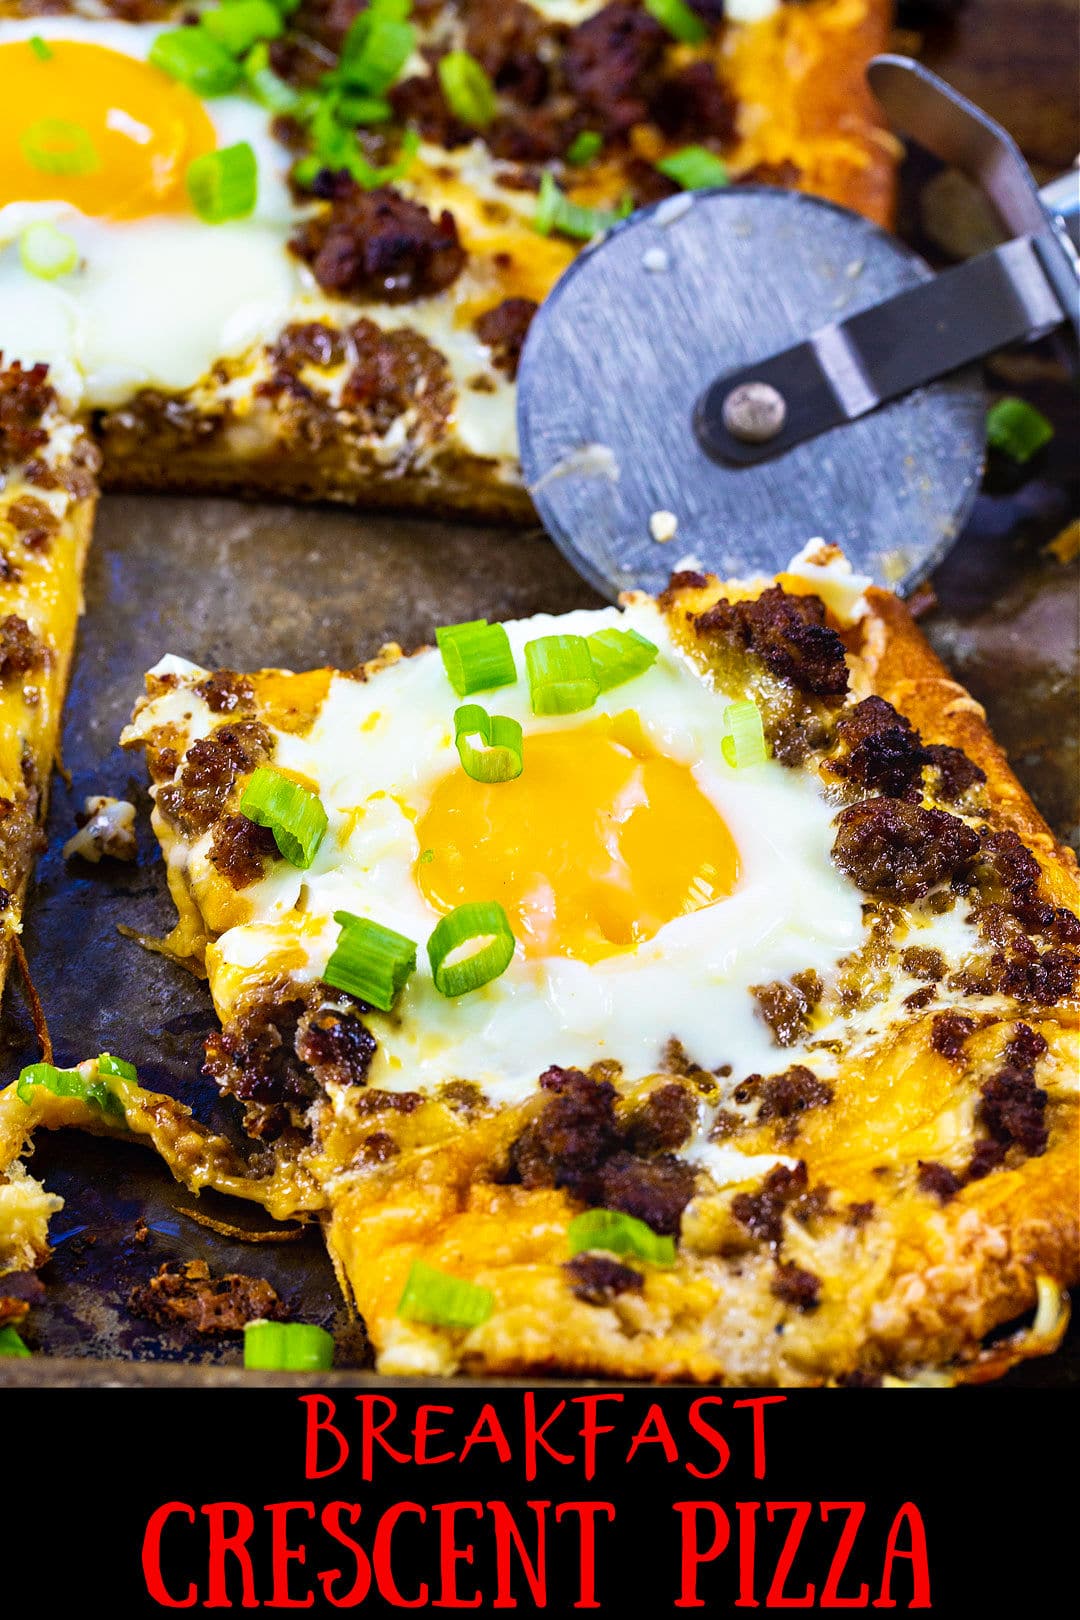 Breakfast Pizza with a slice cut.